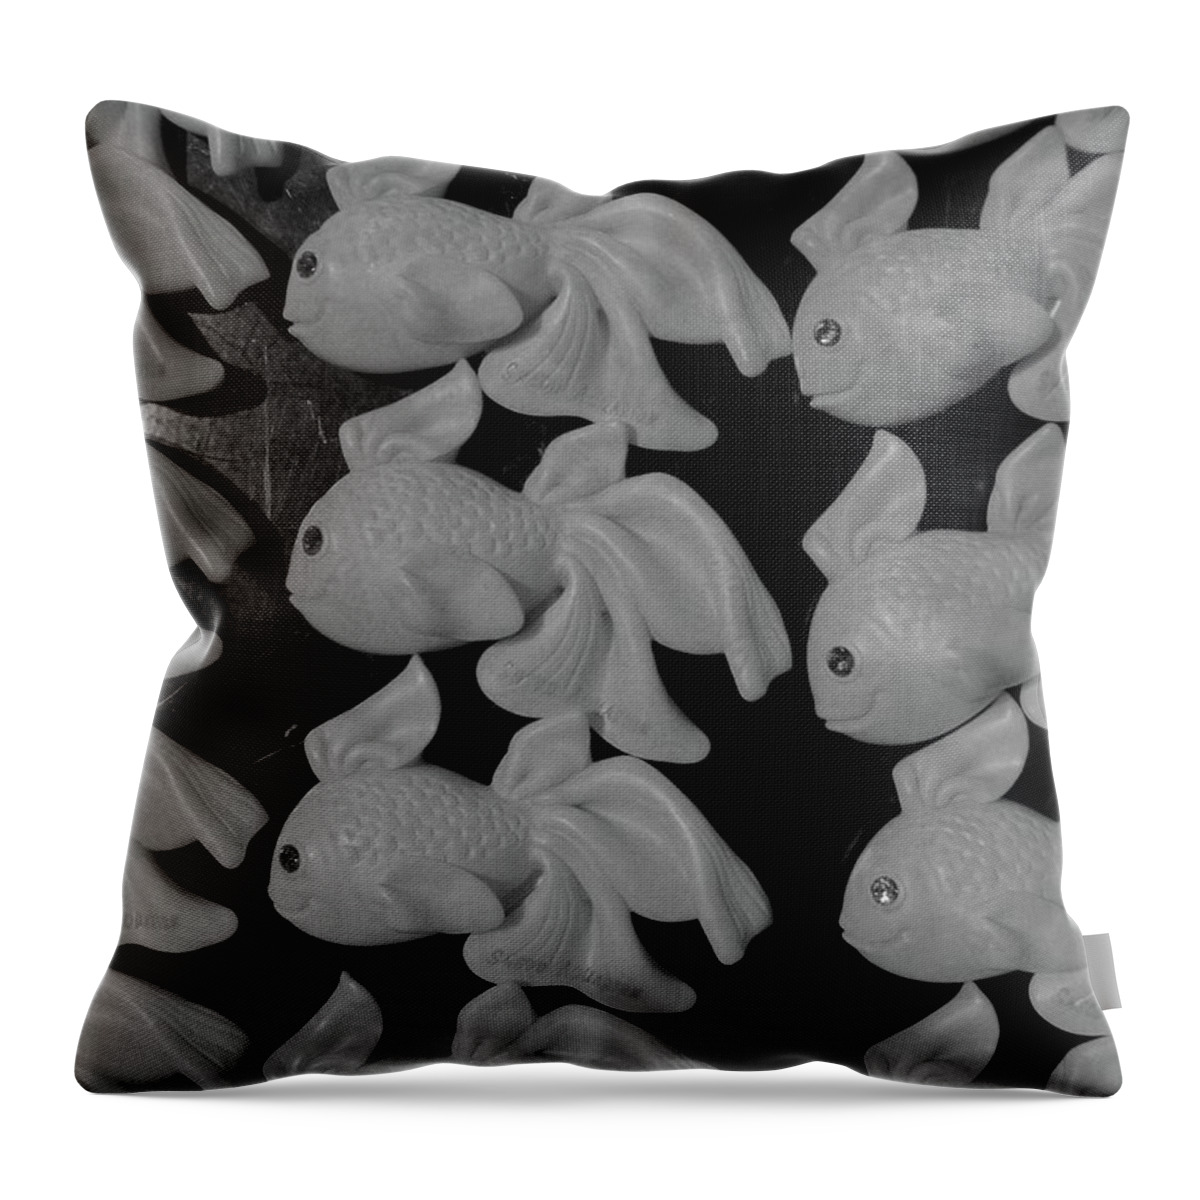 Toys Throw Pillow featuring the photograph Little Fishies by Anna Villarreal Garbis